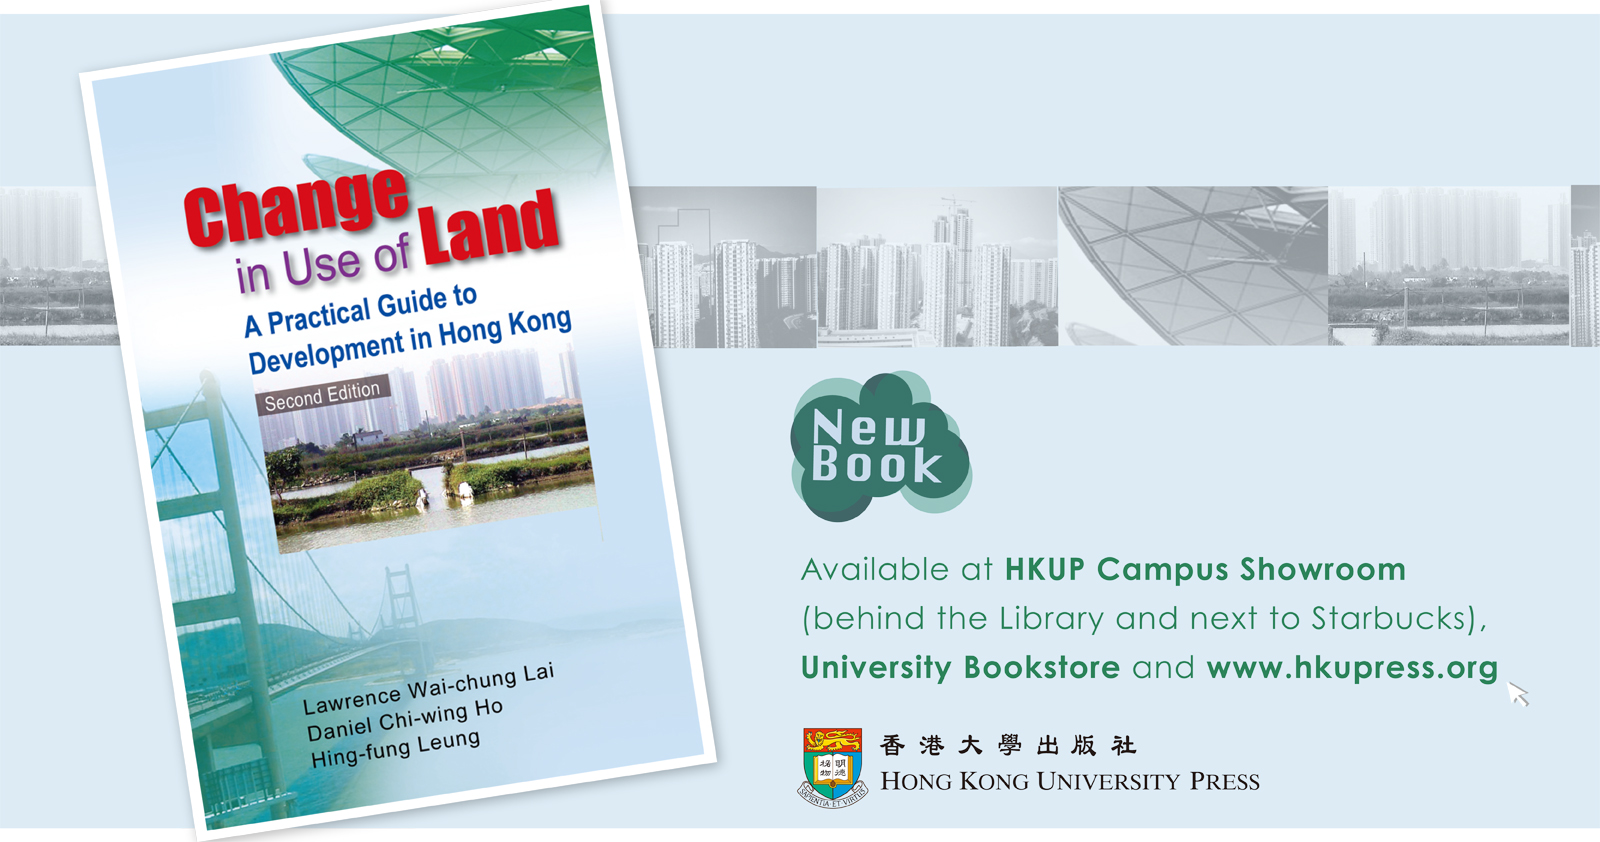 New Book from HKU Press - Change in Use of Land: A Practical Guide to Development in Hong Kong